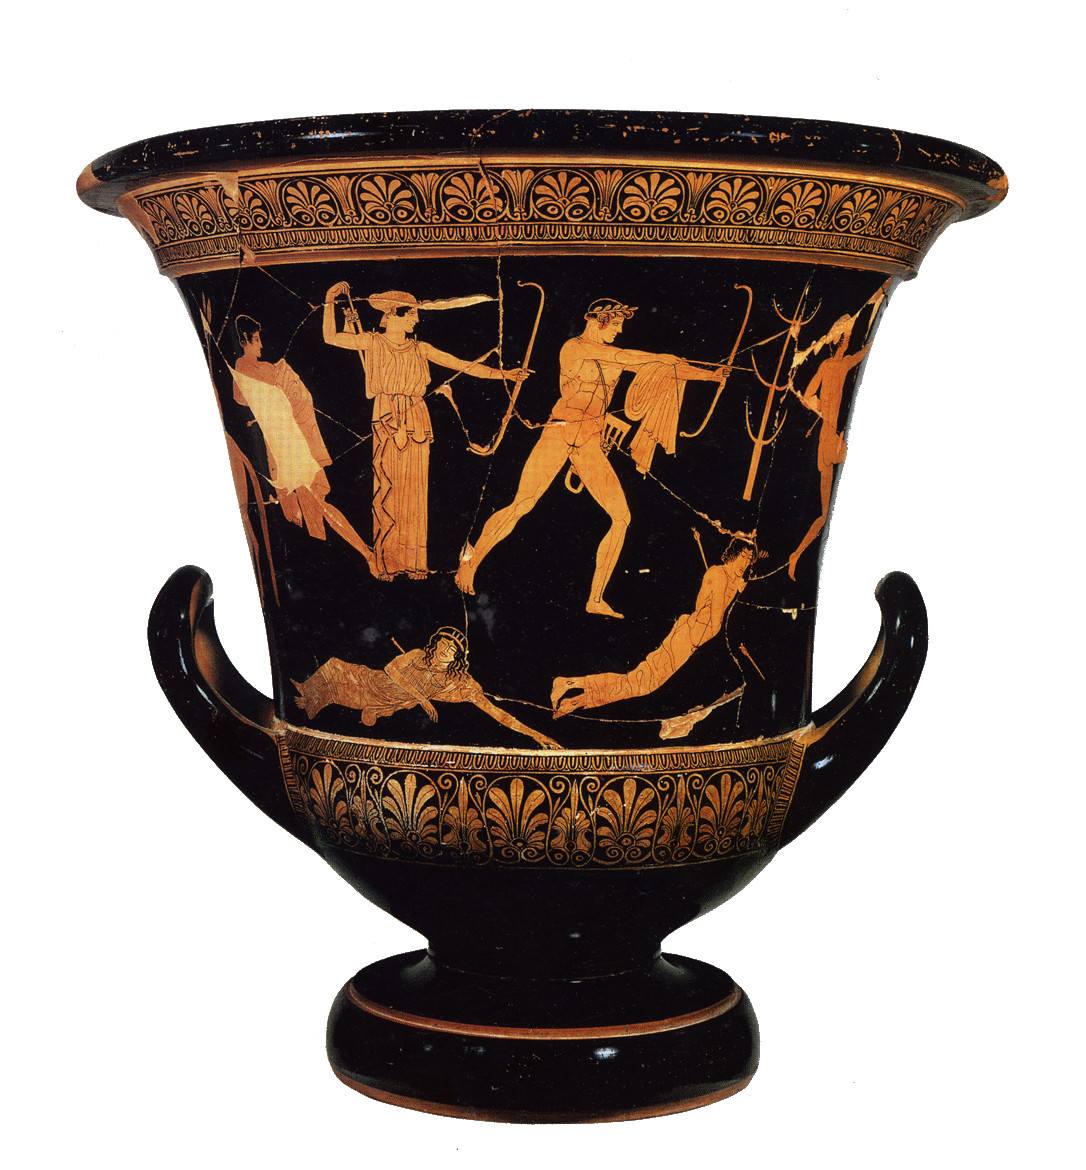 17 Wonderful Vase Painting 2023 free download vase painting of the history of ancient greece podcast 057 classical paintings pertaining to photo vase painting of apollo and artemis killing niobes children by niobid painter